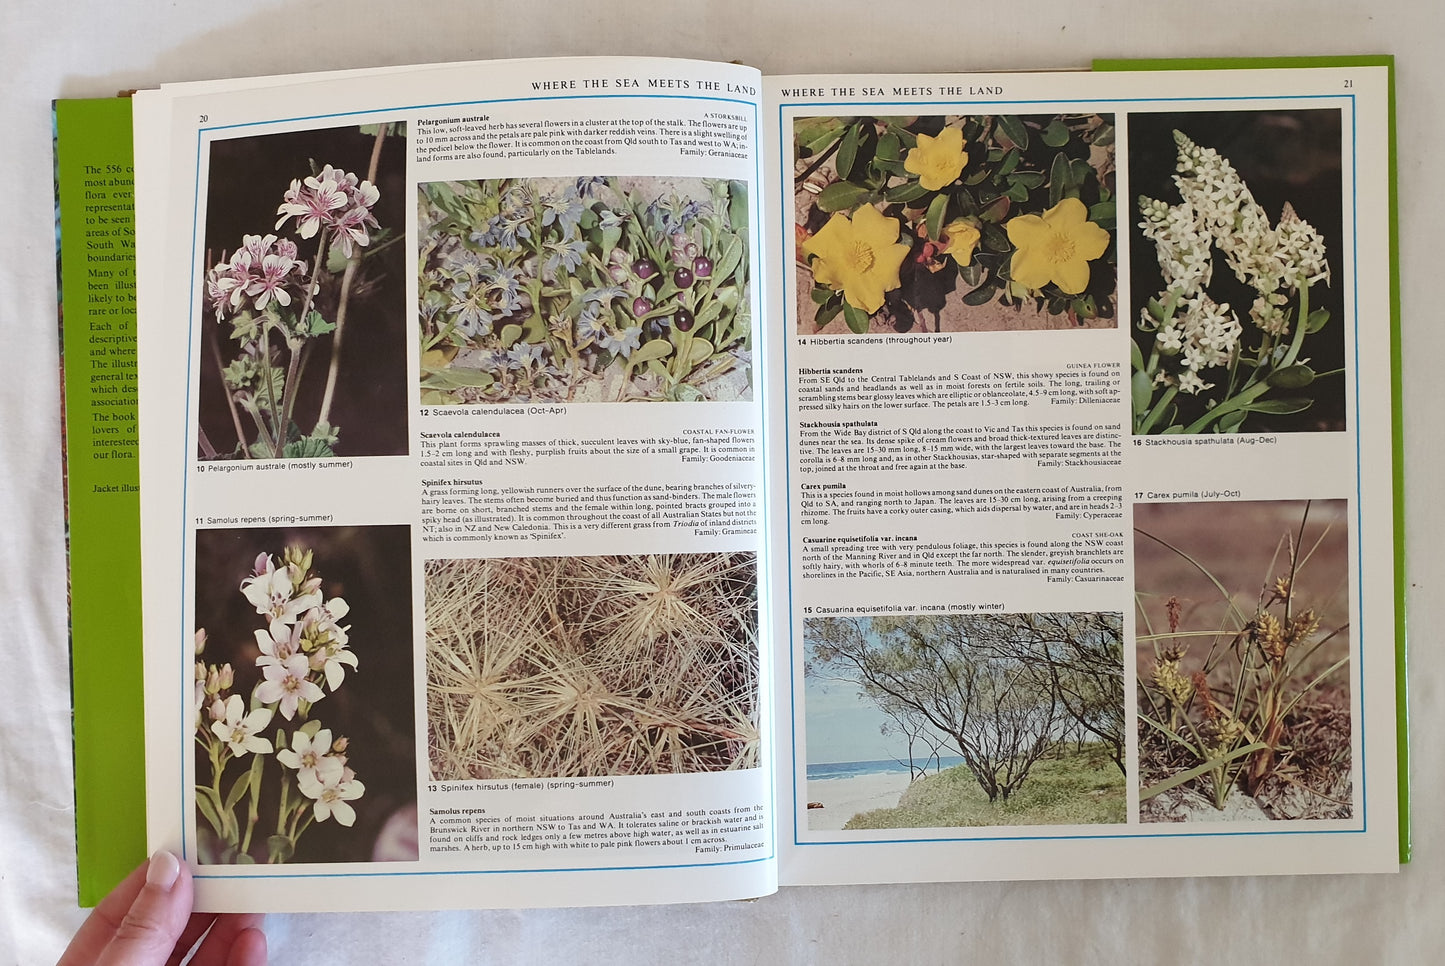 Flowers and Plants of New South Wales and Southern Queensland